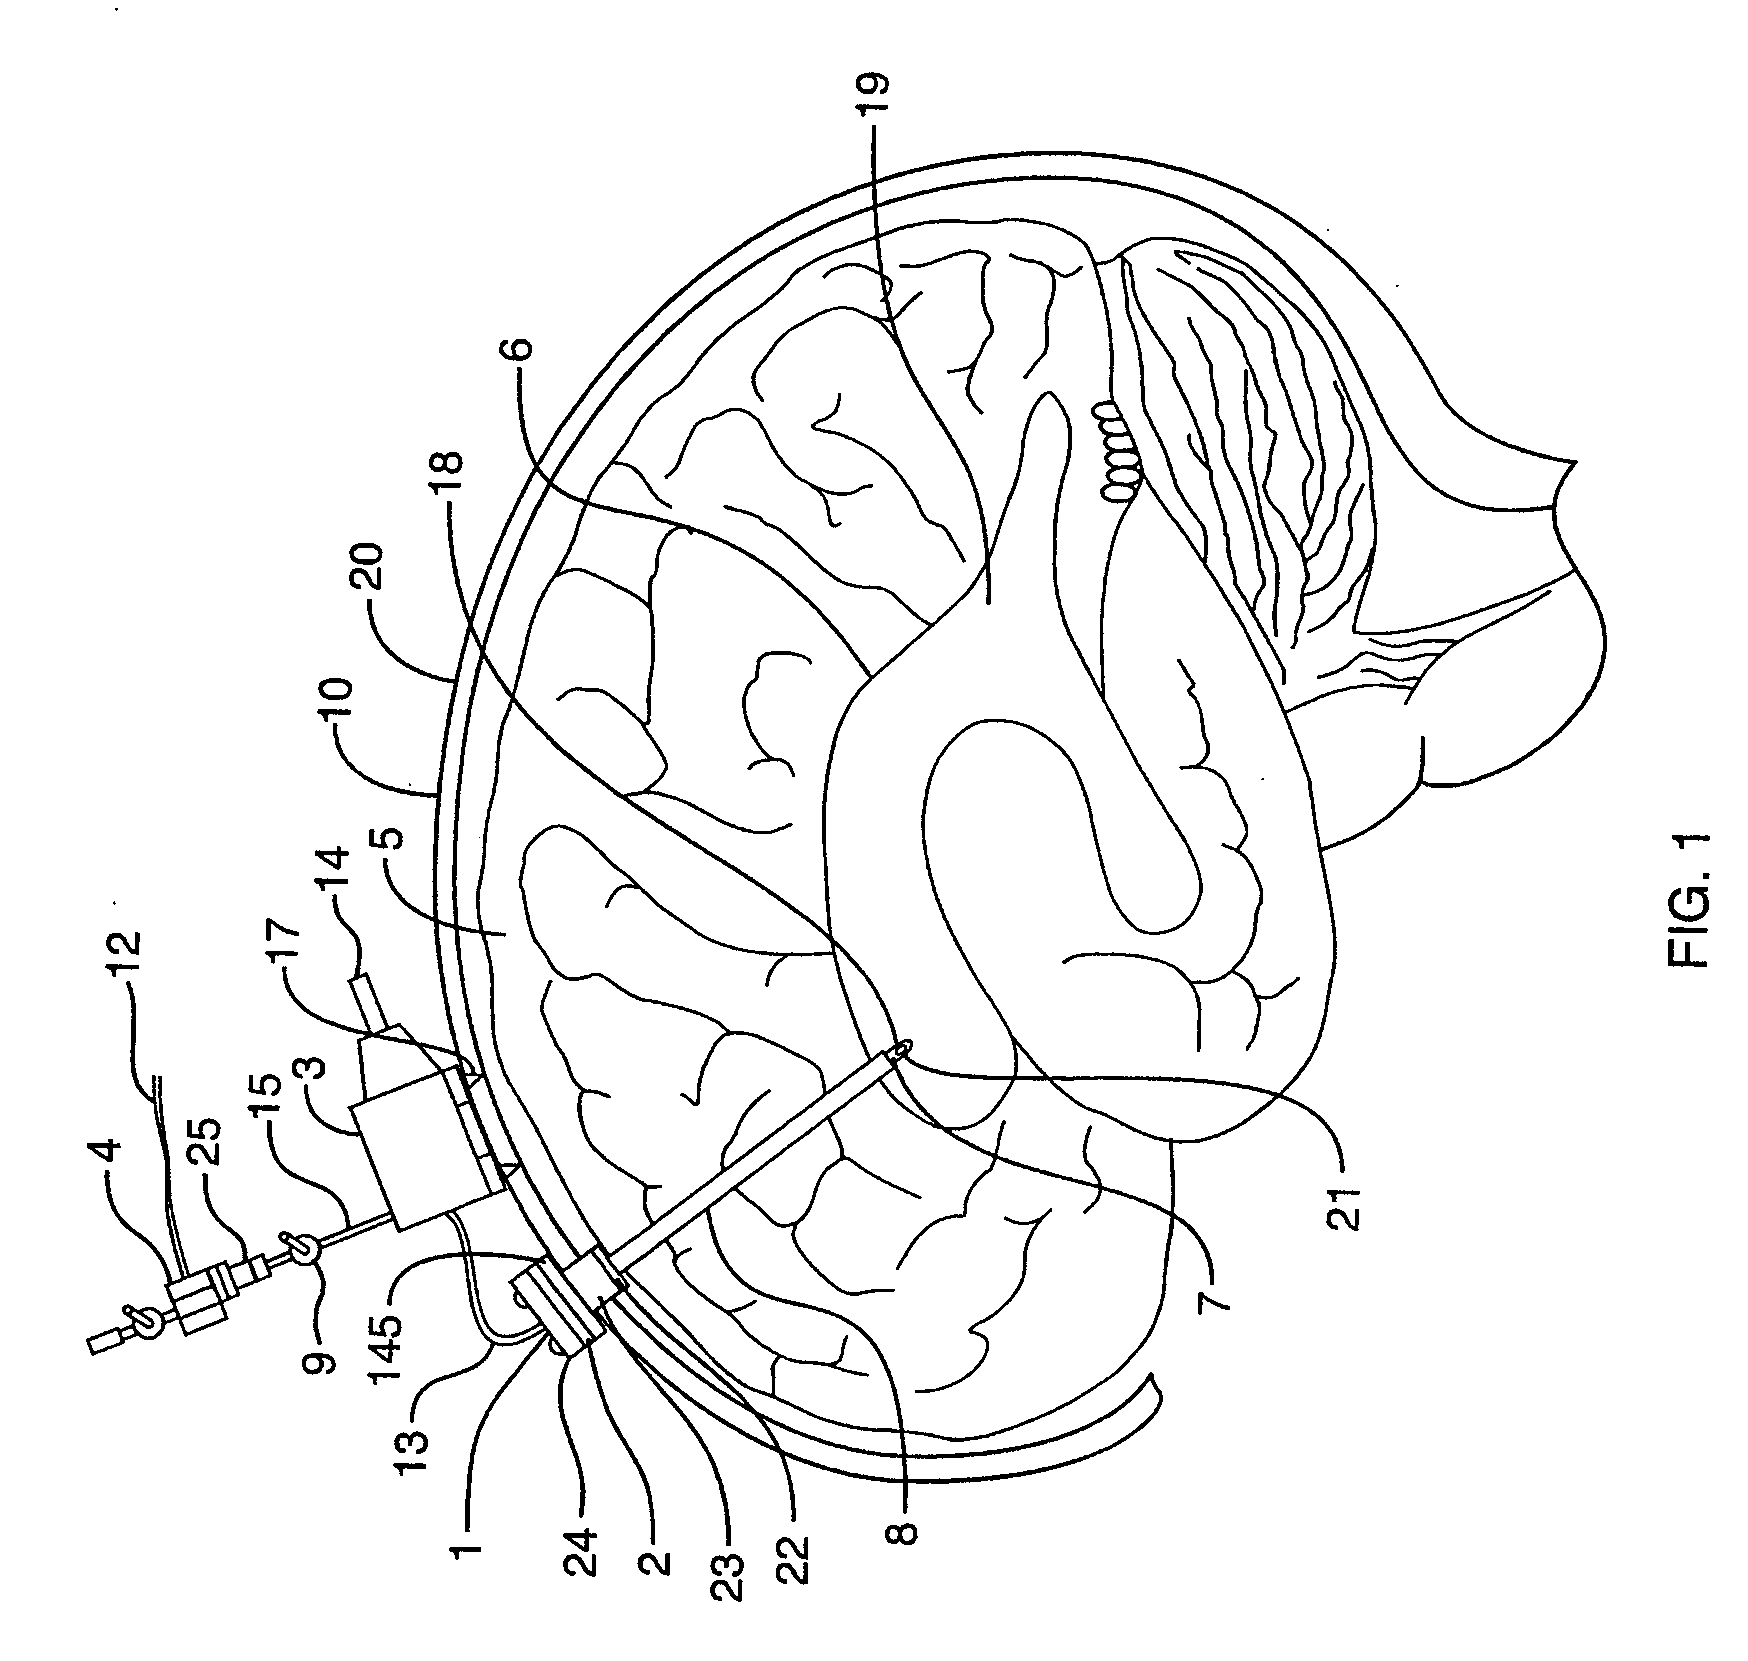 Method and device for reducing secondary brain injury